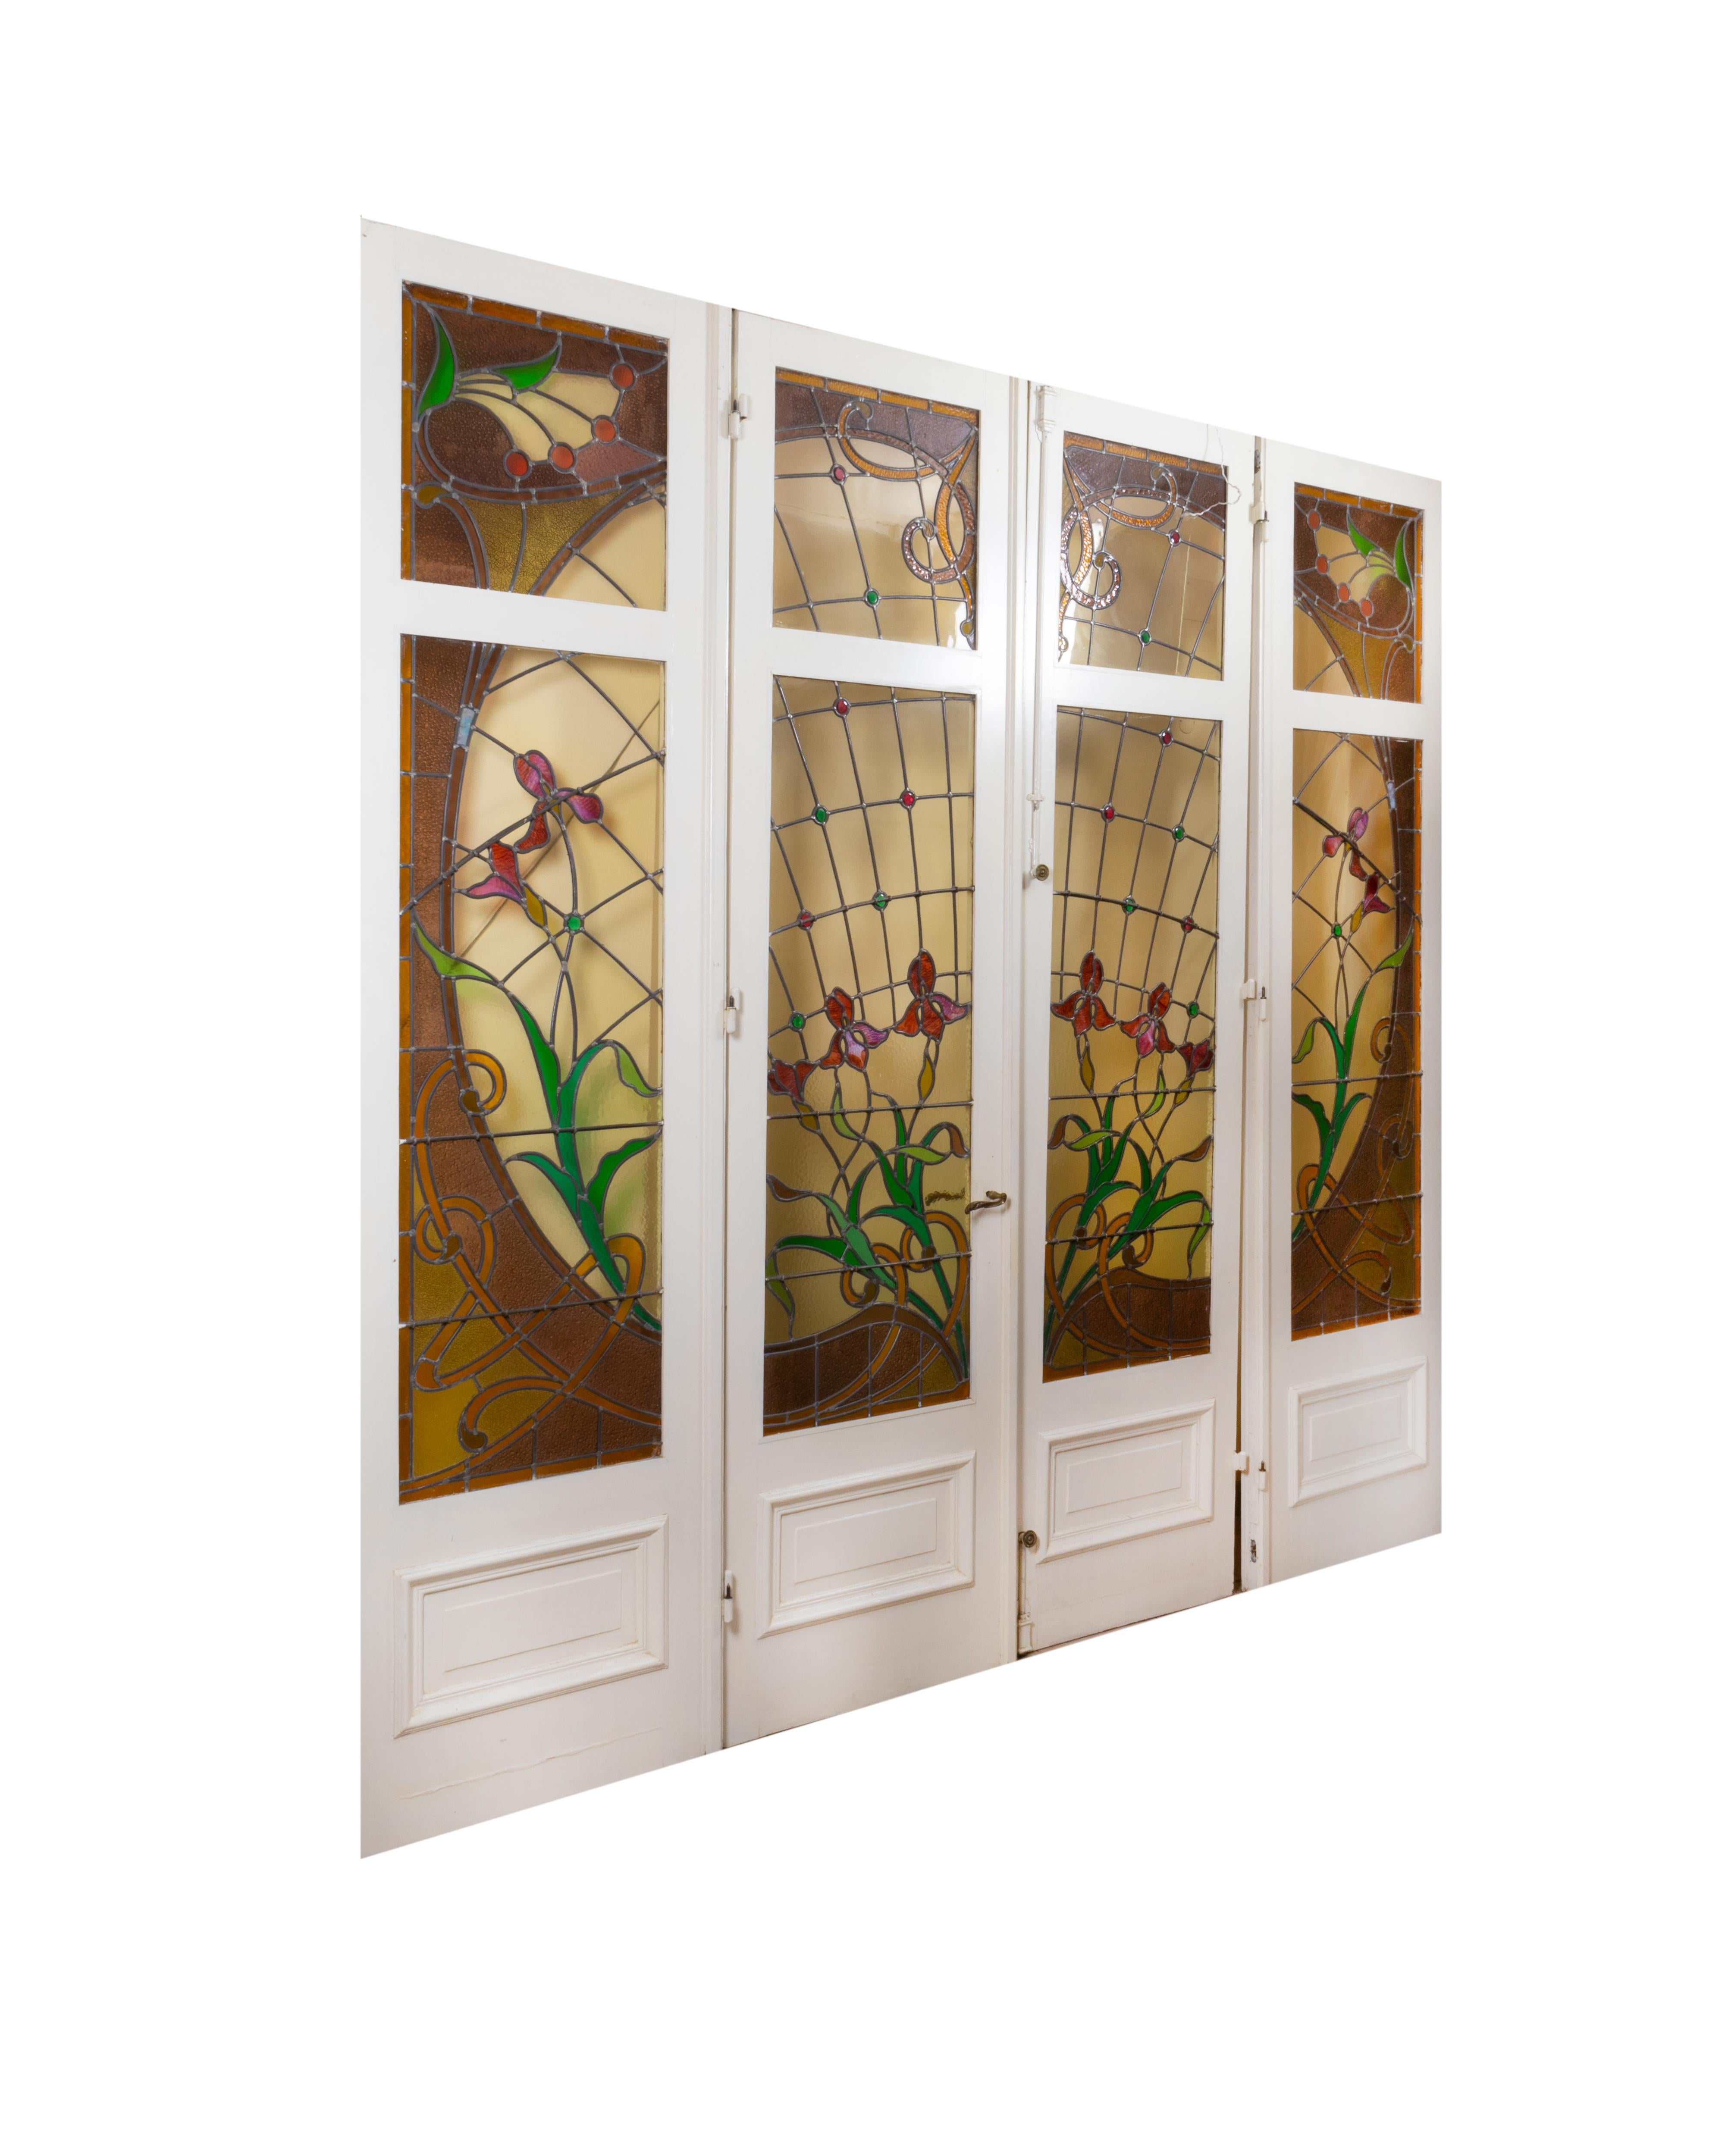 A wonderful set of eight French stained glass windows in four doors with bronze handles. The set of eight panels is in stained glass in polychrome glass with shutters, locks, handle and original key.  

Beautiful stained glass from the Art Nouveau